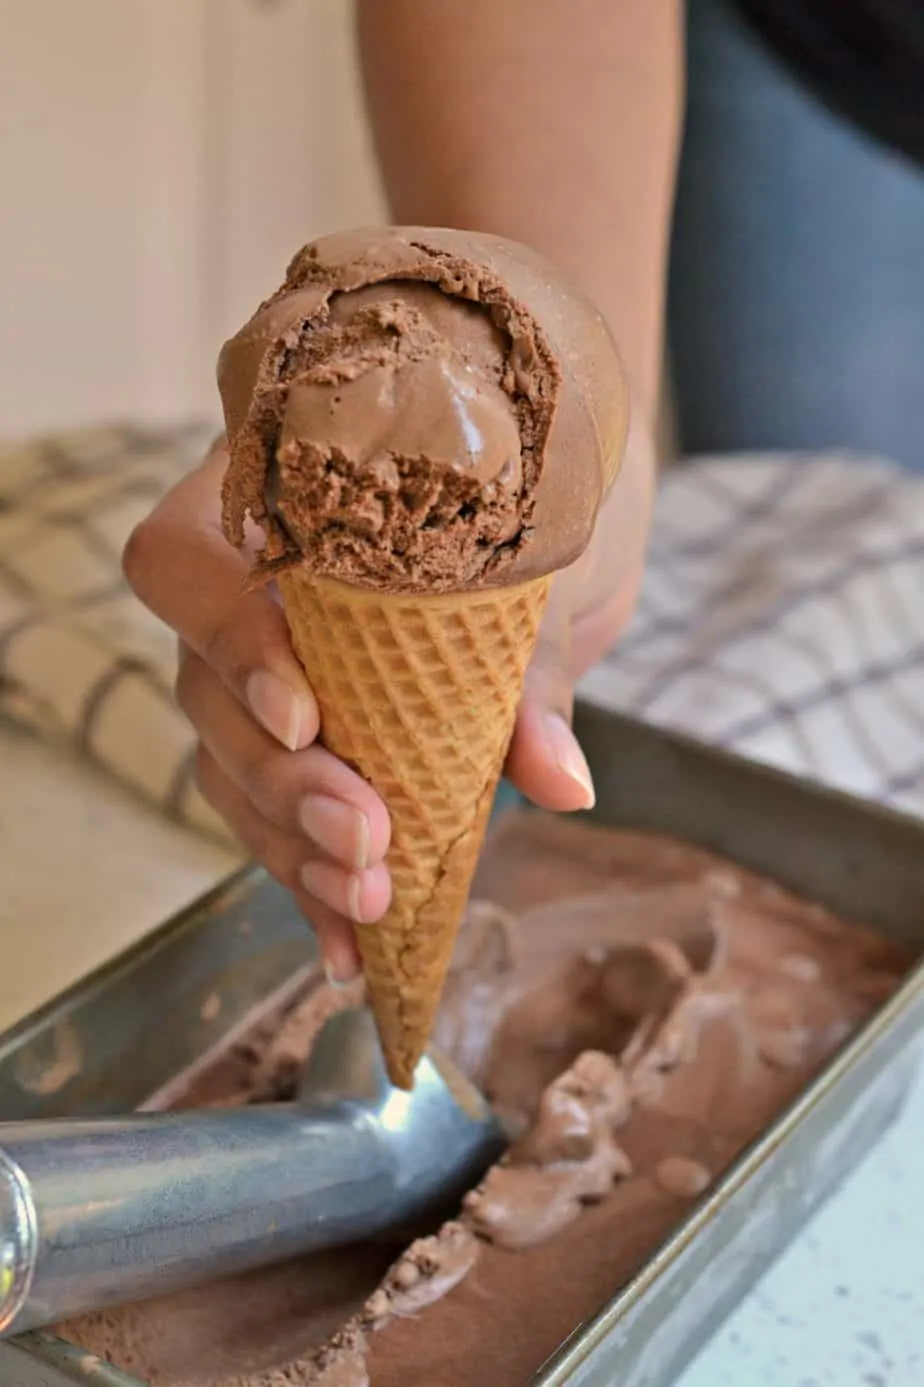  This rich Chocolate Ice Cream is made with a handful of ingredients in two easy steps and finished in an ice cream maker.